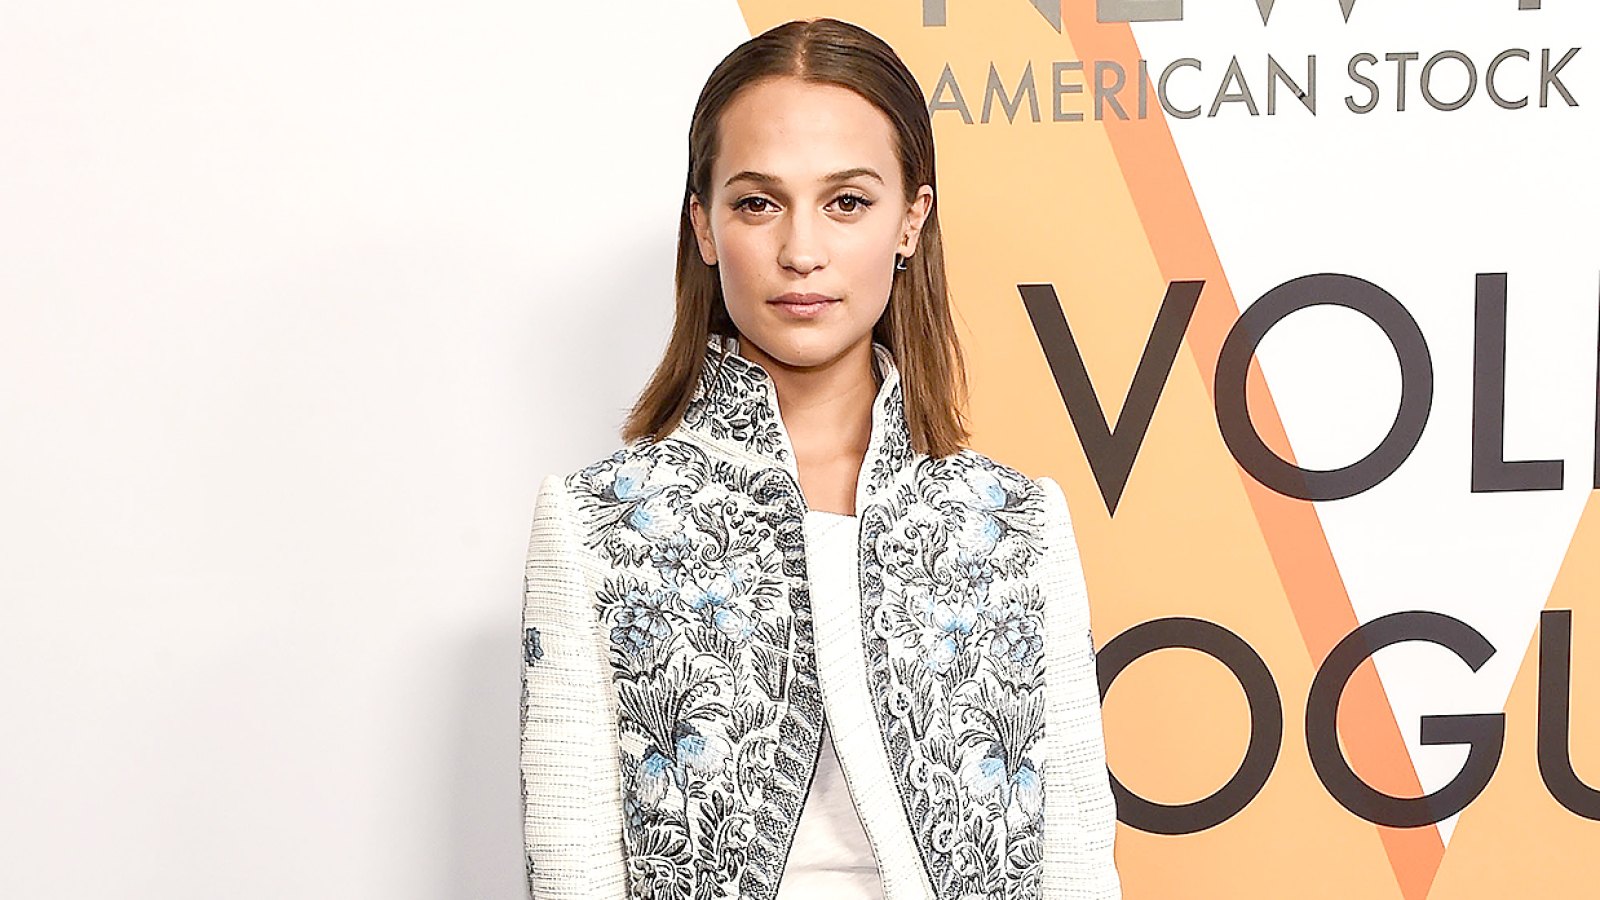 Alicia Vikander opens up about family, fame, and her road to becoming  Scandinavia's biggest star - Vogue Scandinavia